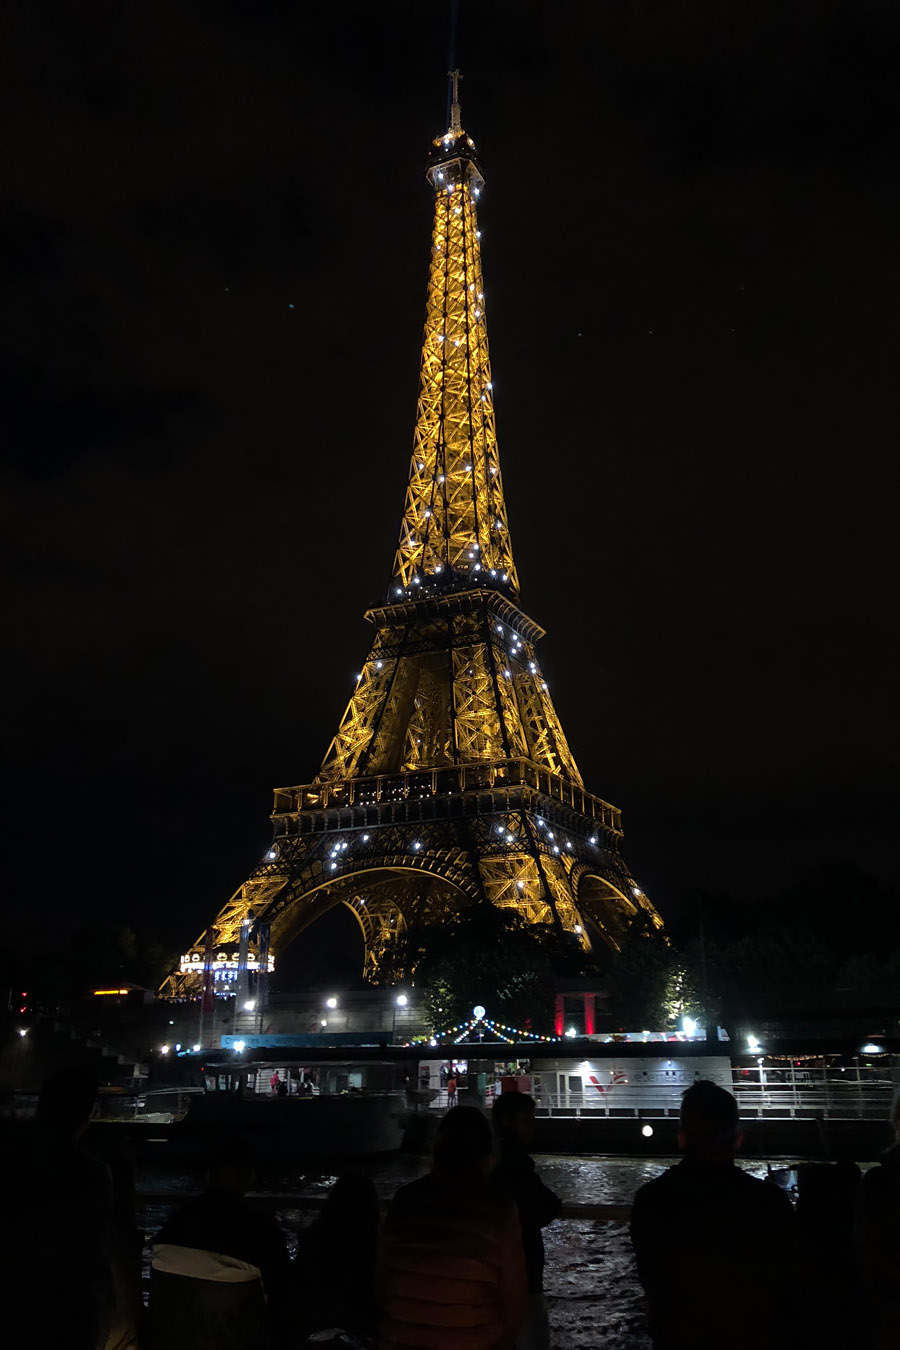 Best Paris boat tour tips for sightseeing cruise on the Seine River in Paris, France. Eiffel tower at night sparkling